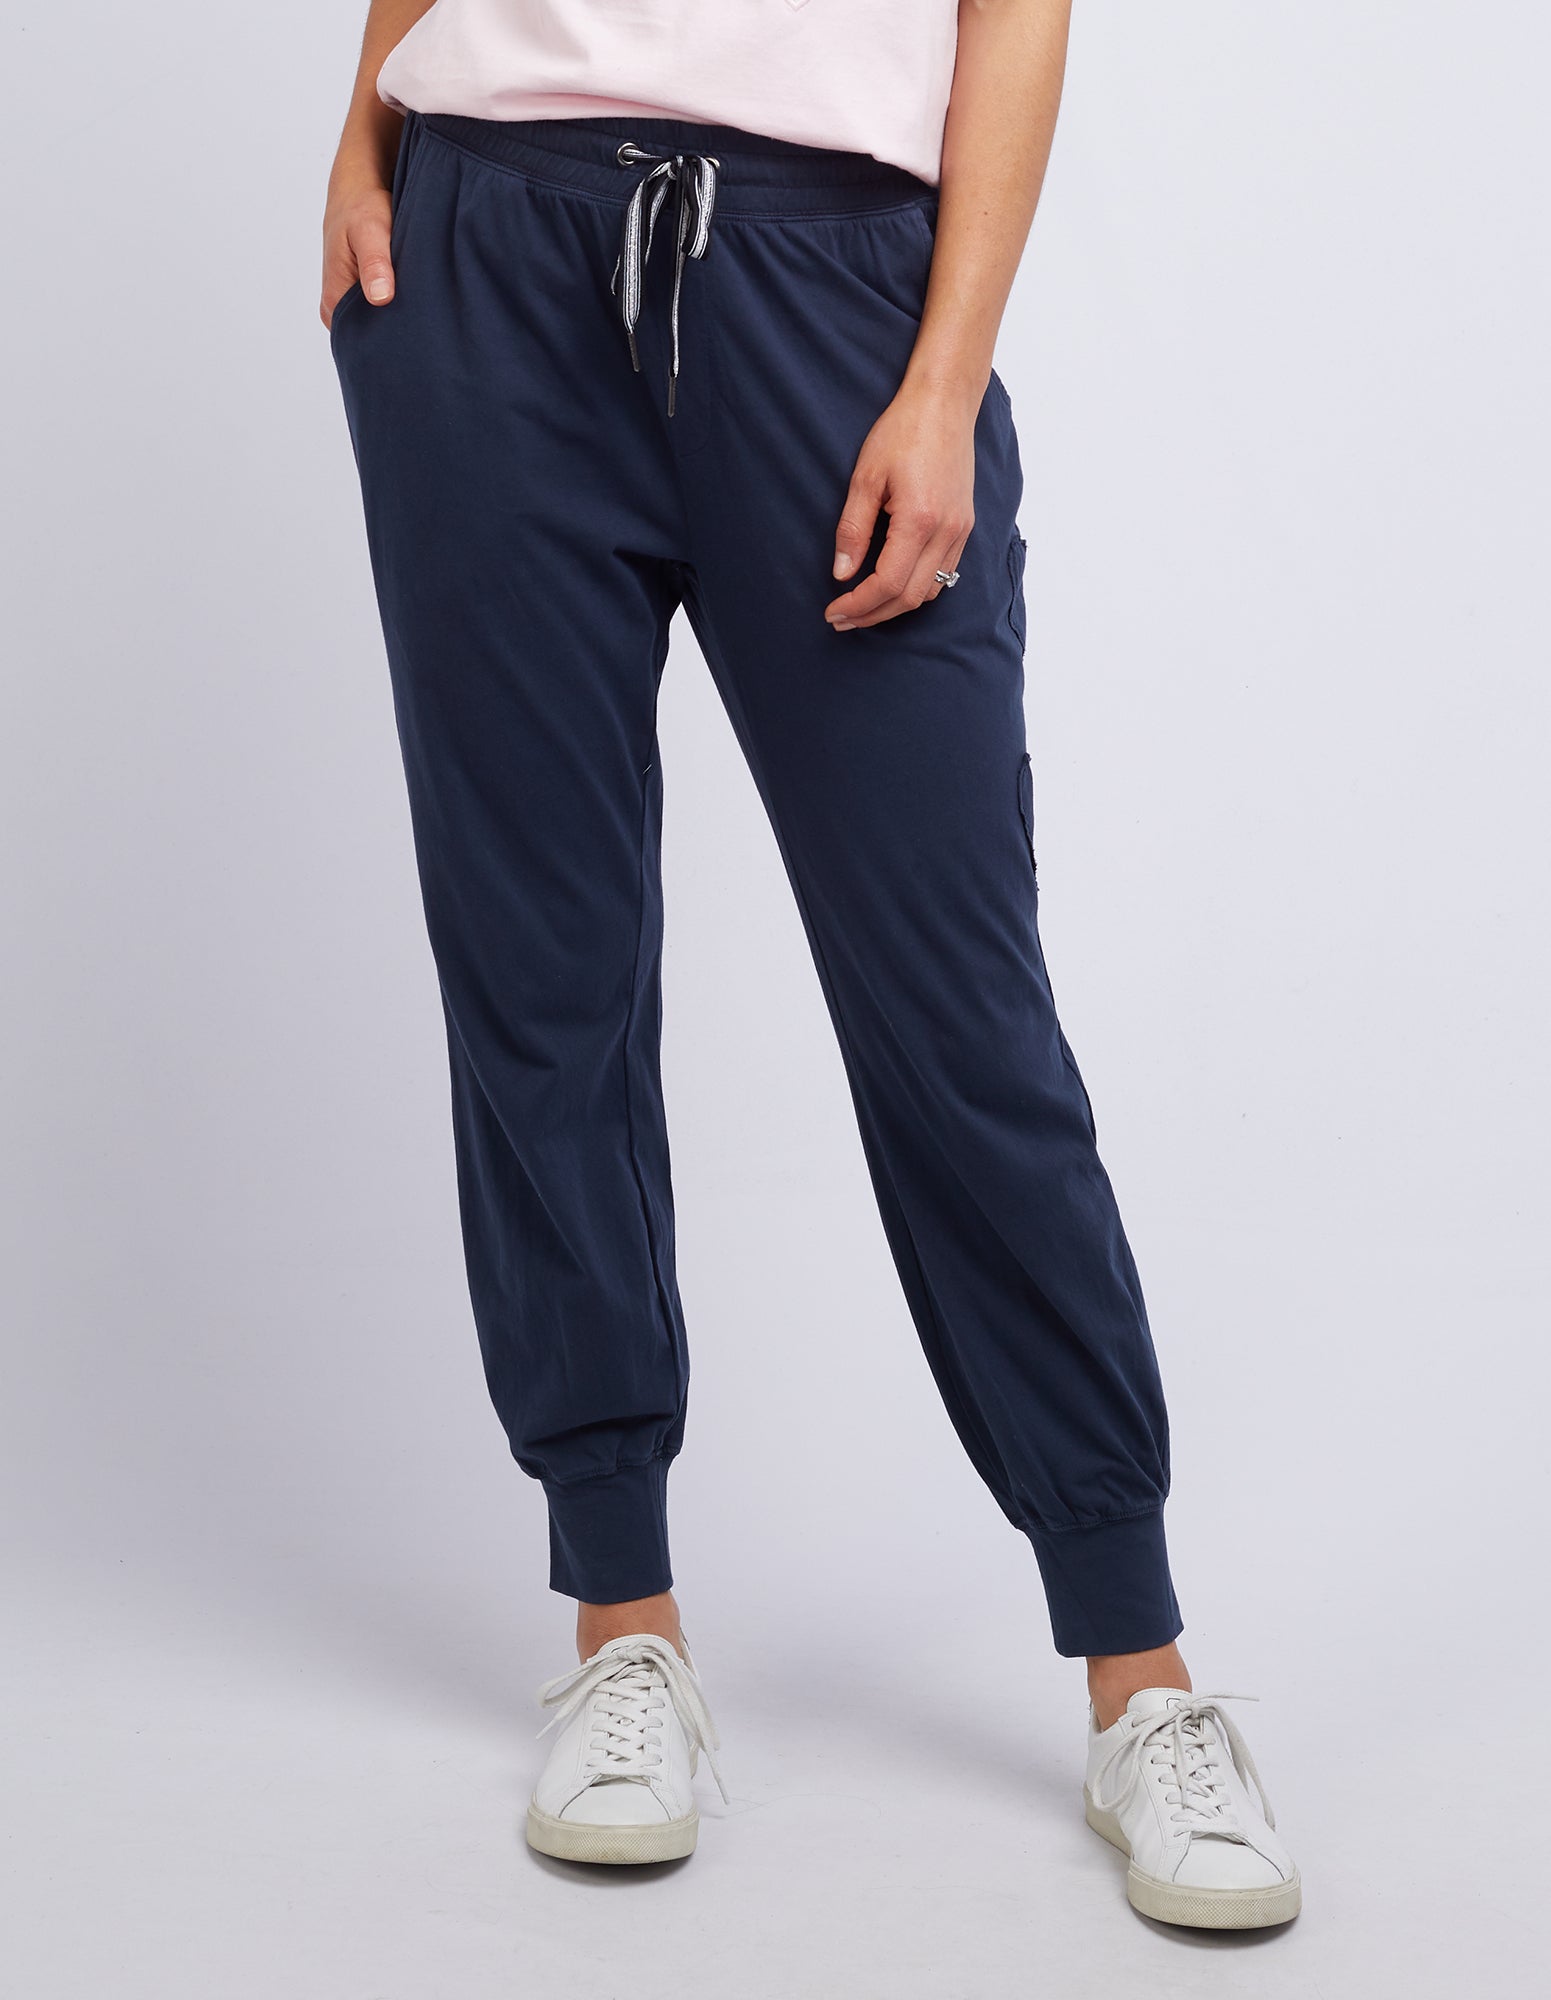 Heart to Heart Pant by Elm